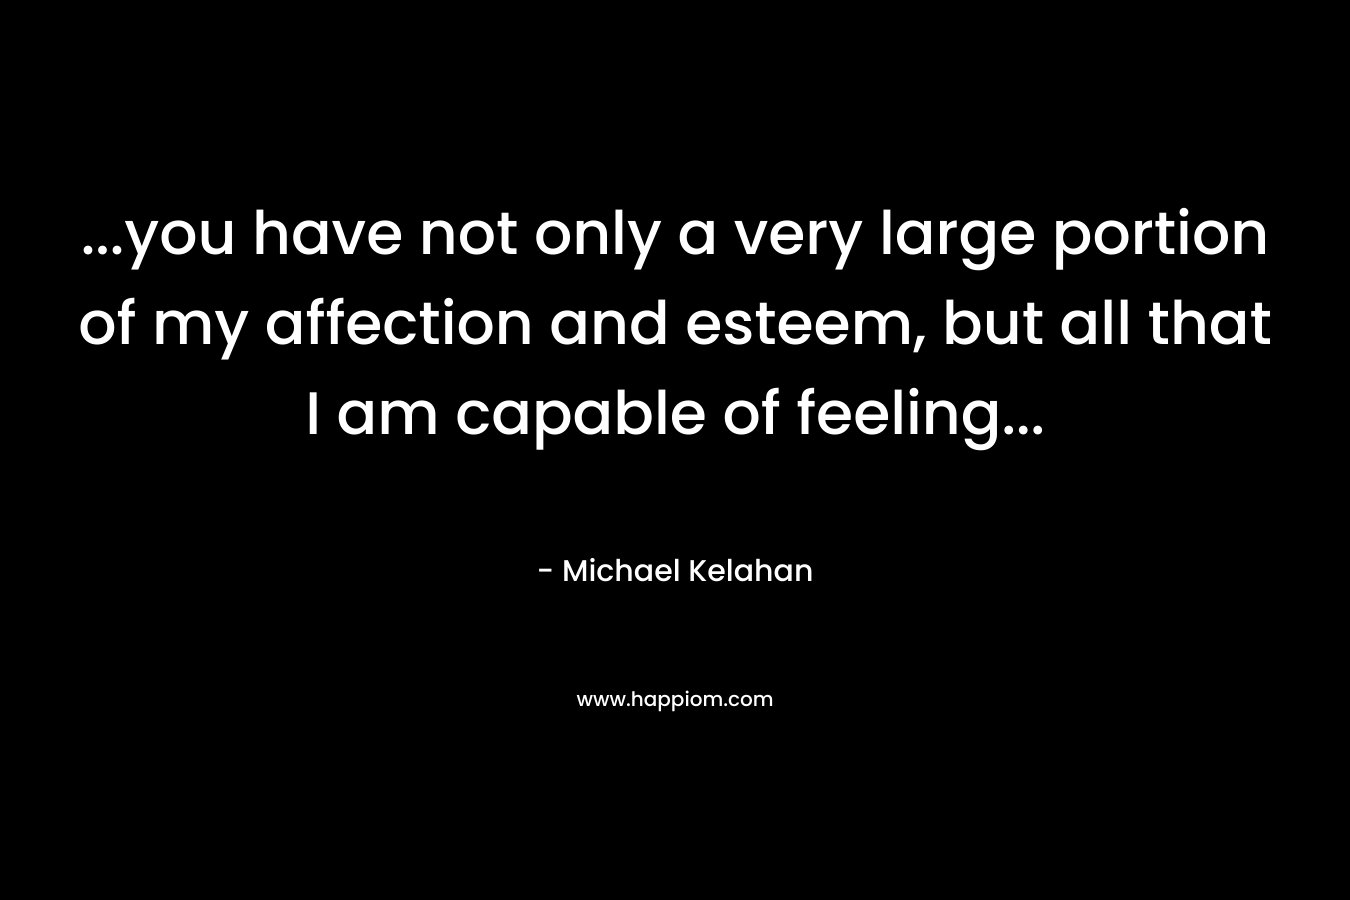 …you have not only a very large portion of my affection and esteem, but all that I am capable of feeling… – Michael Kelahan